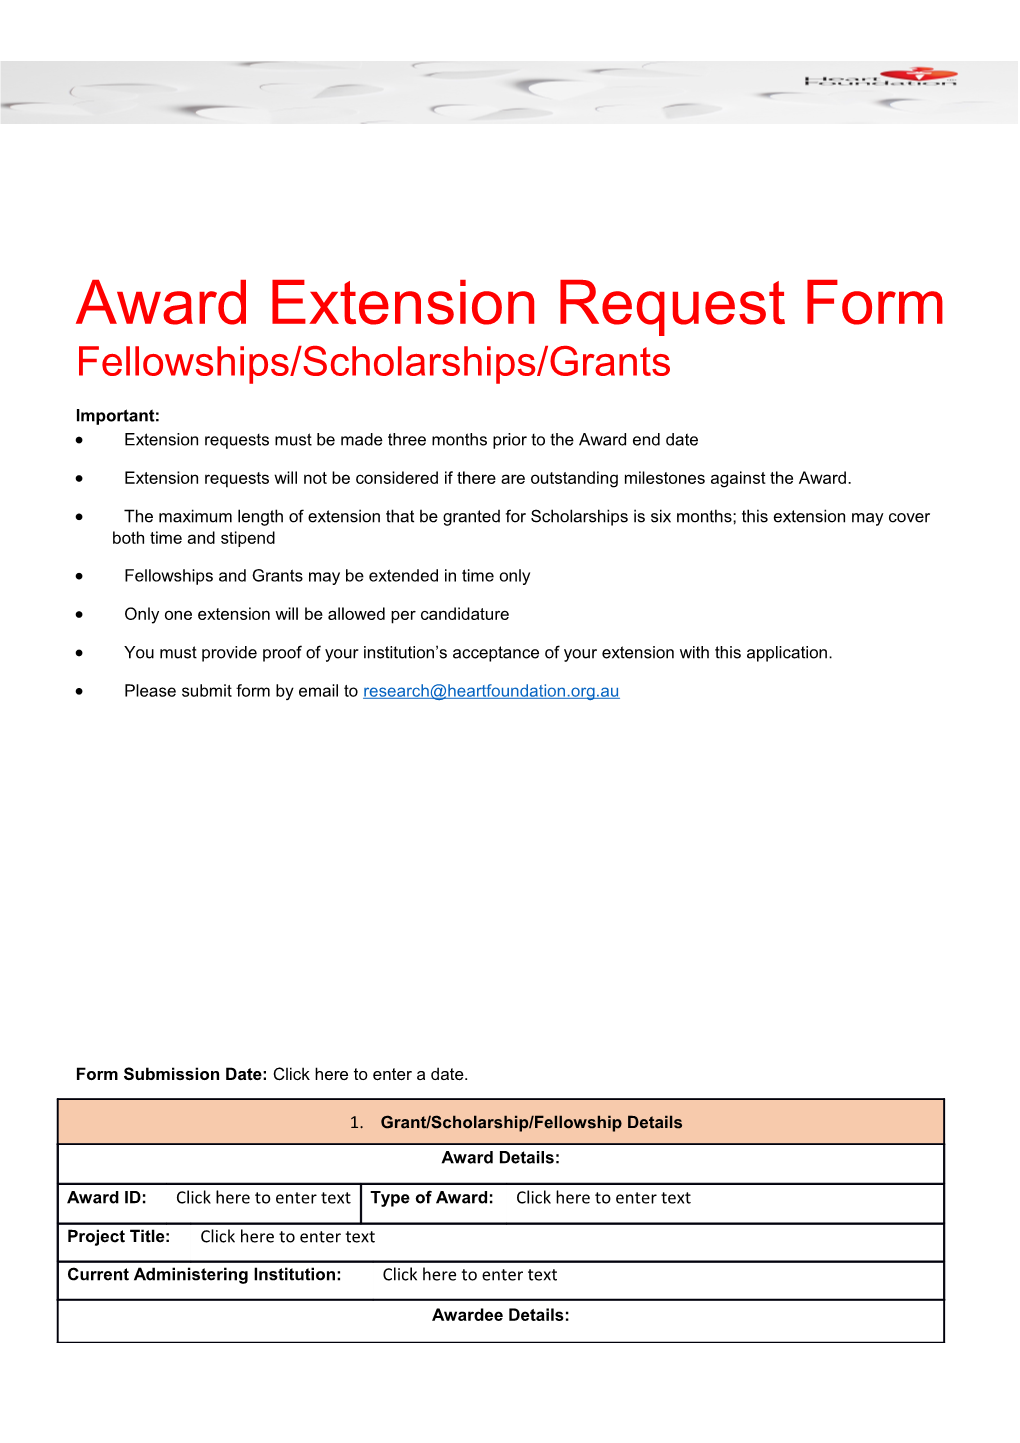 Award Extension Request Form